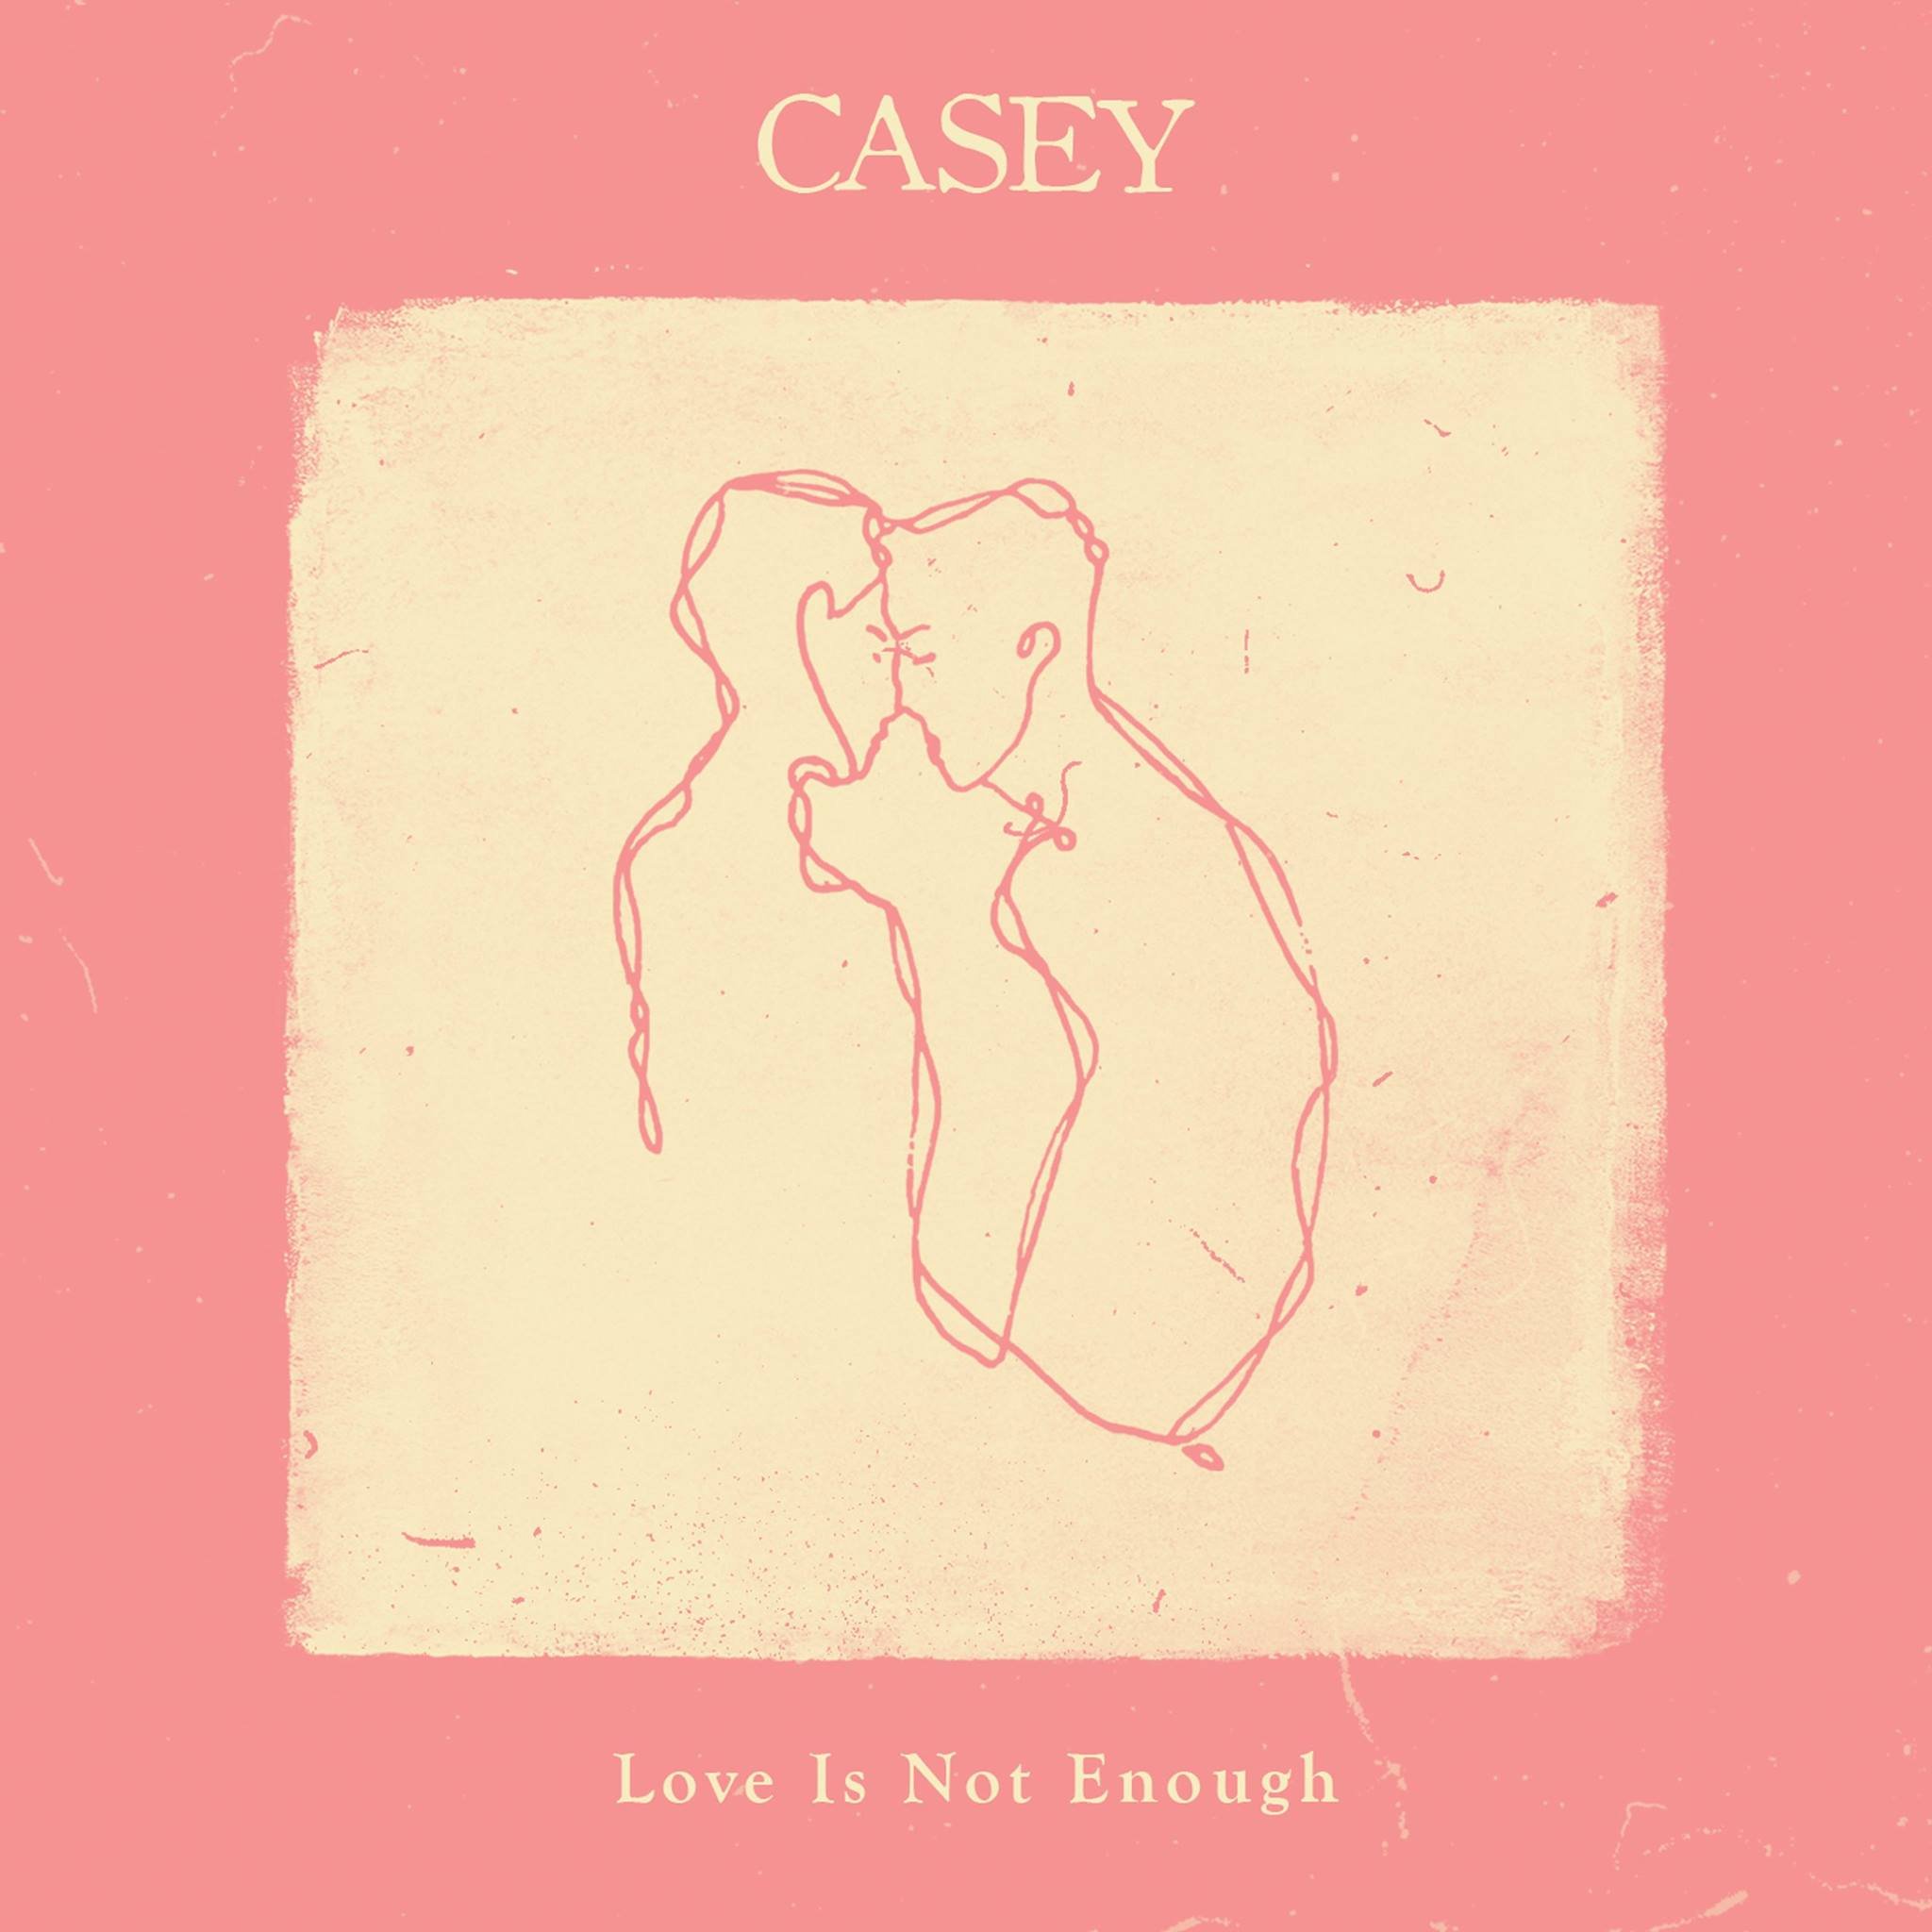 Life is not enough. Casey — Love is not enough. Casey Love is not. Love is обложка. Обложка для любовного альбома.